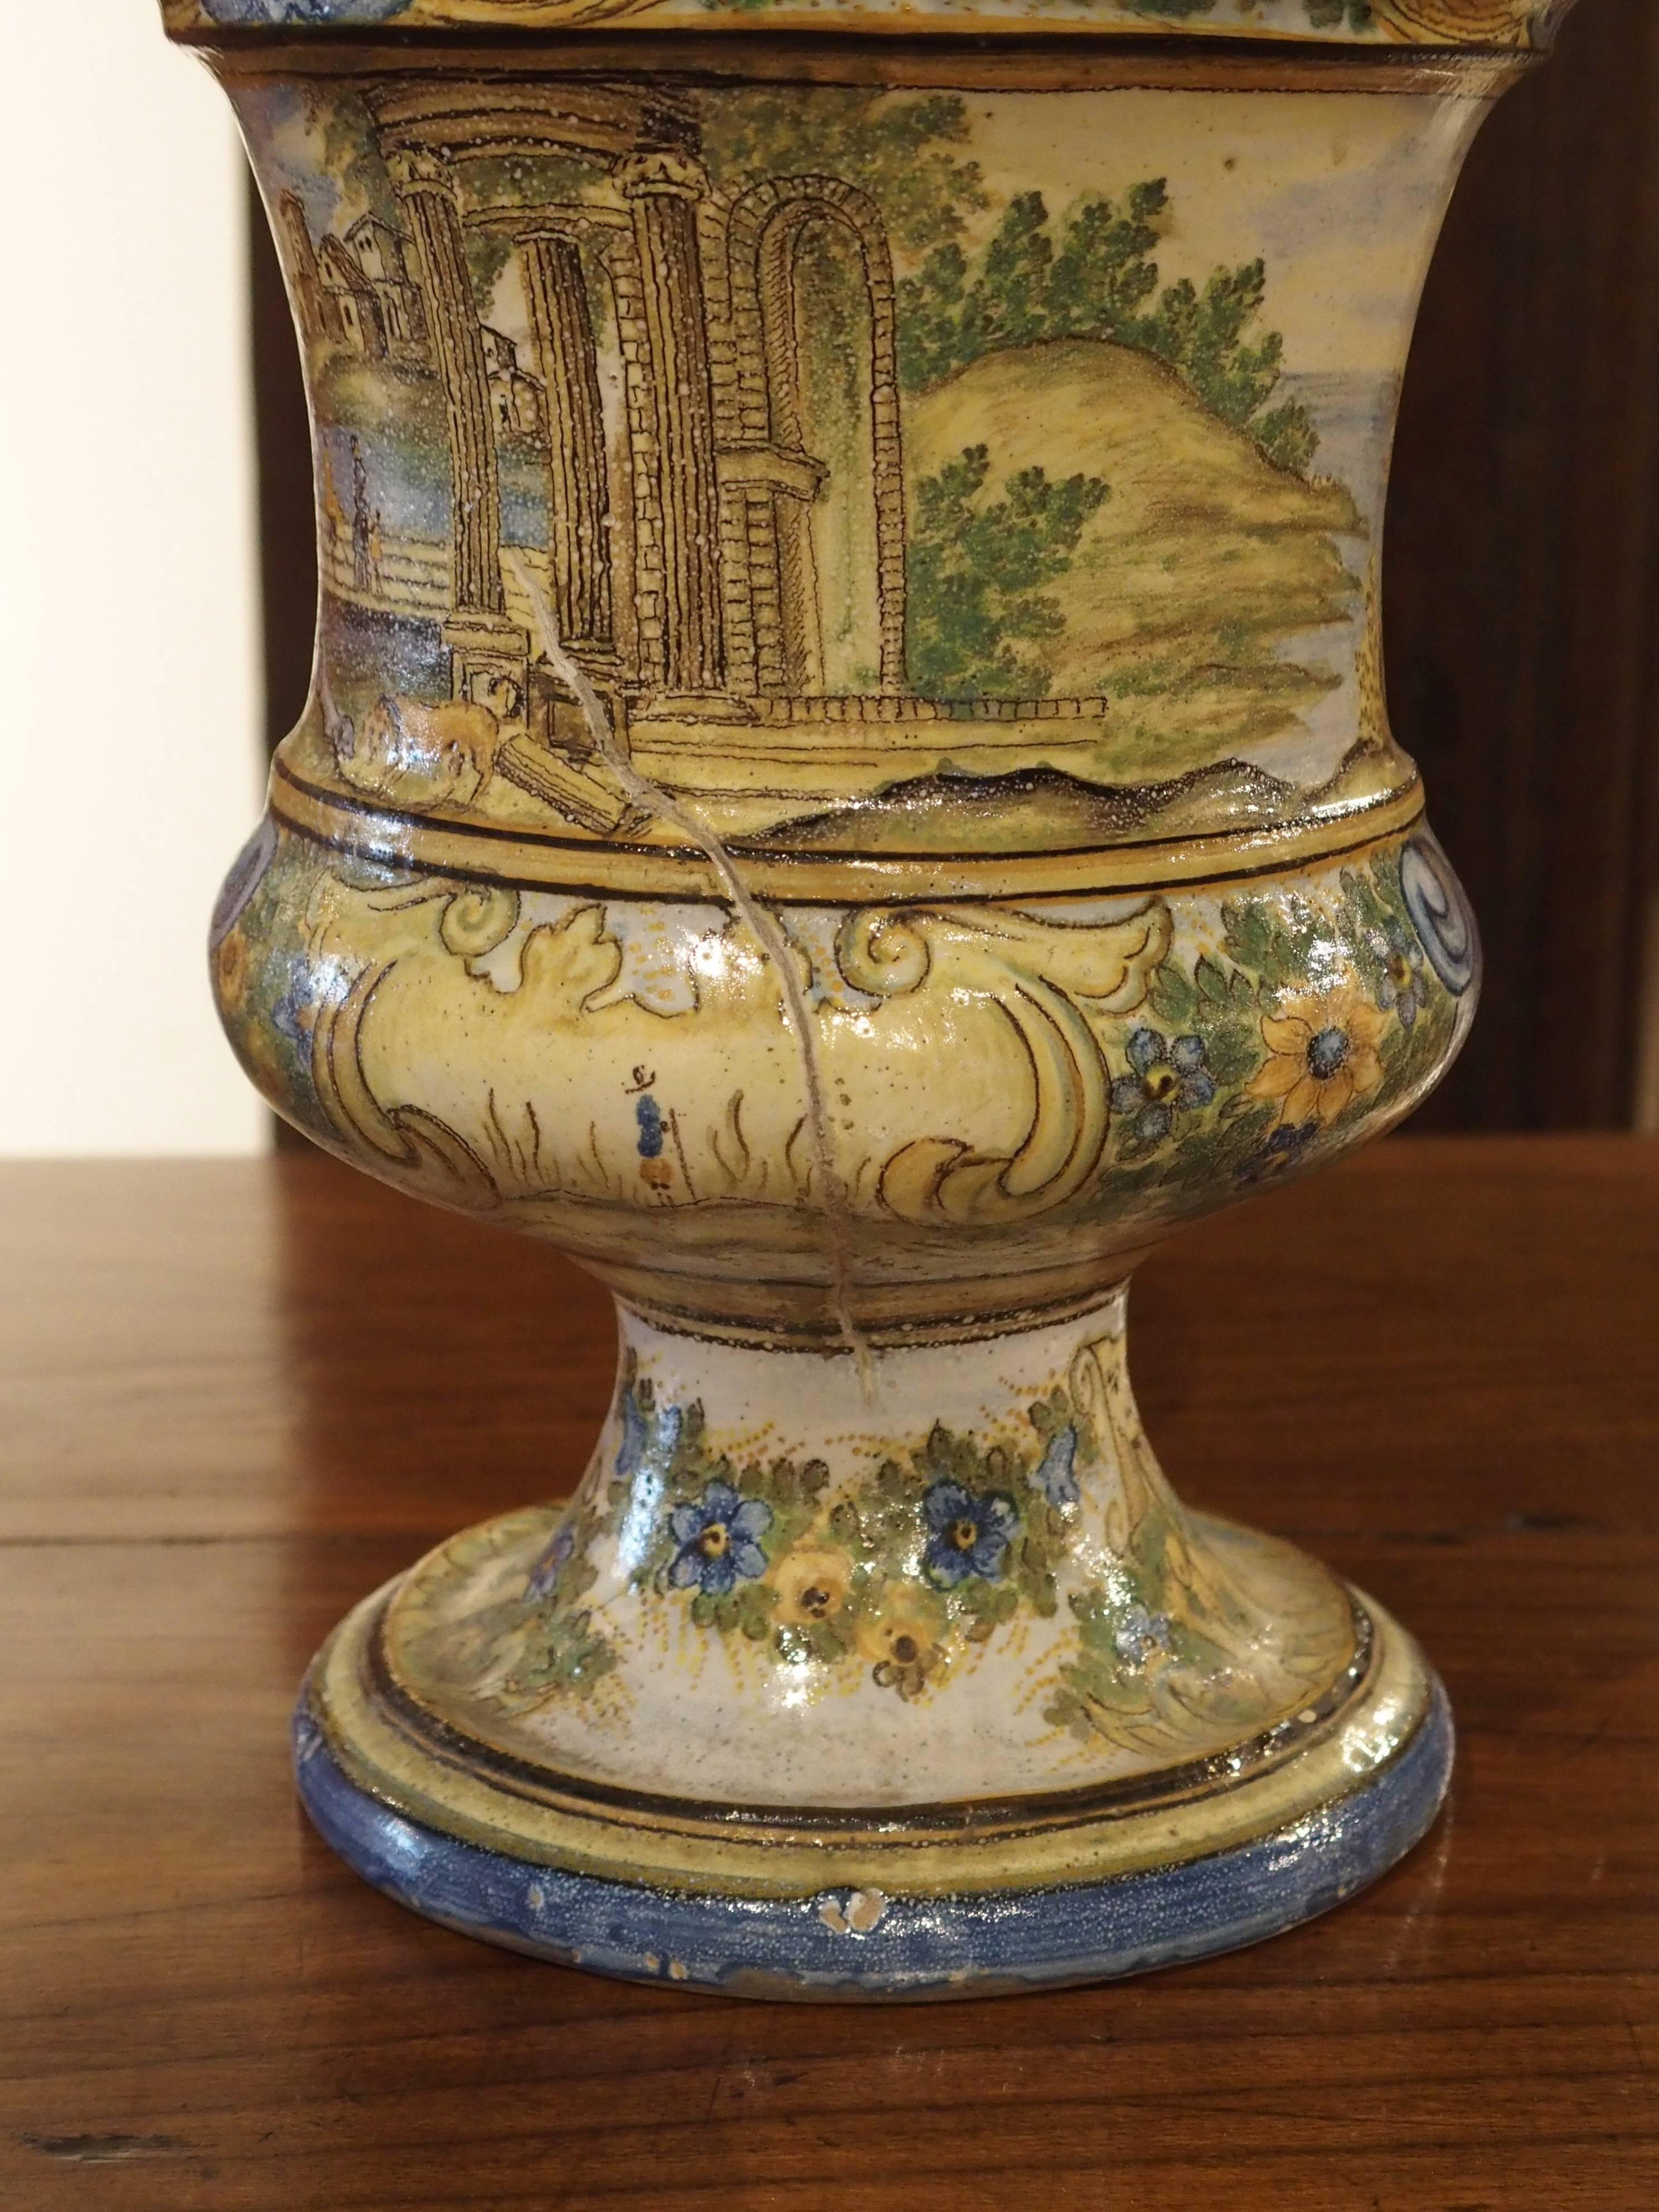 Italian Small Antique Ceramic Urn from Italy, Early 1800s